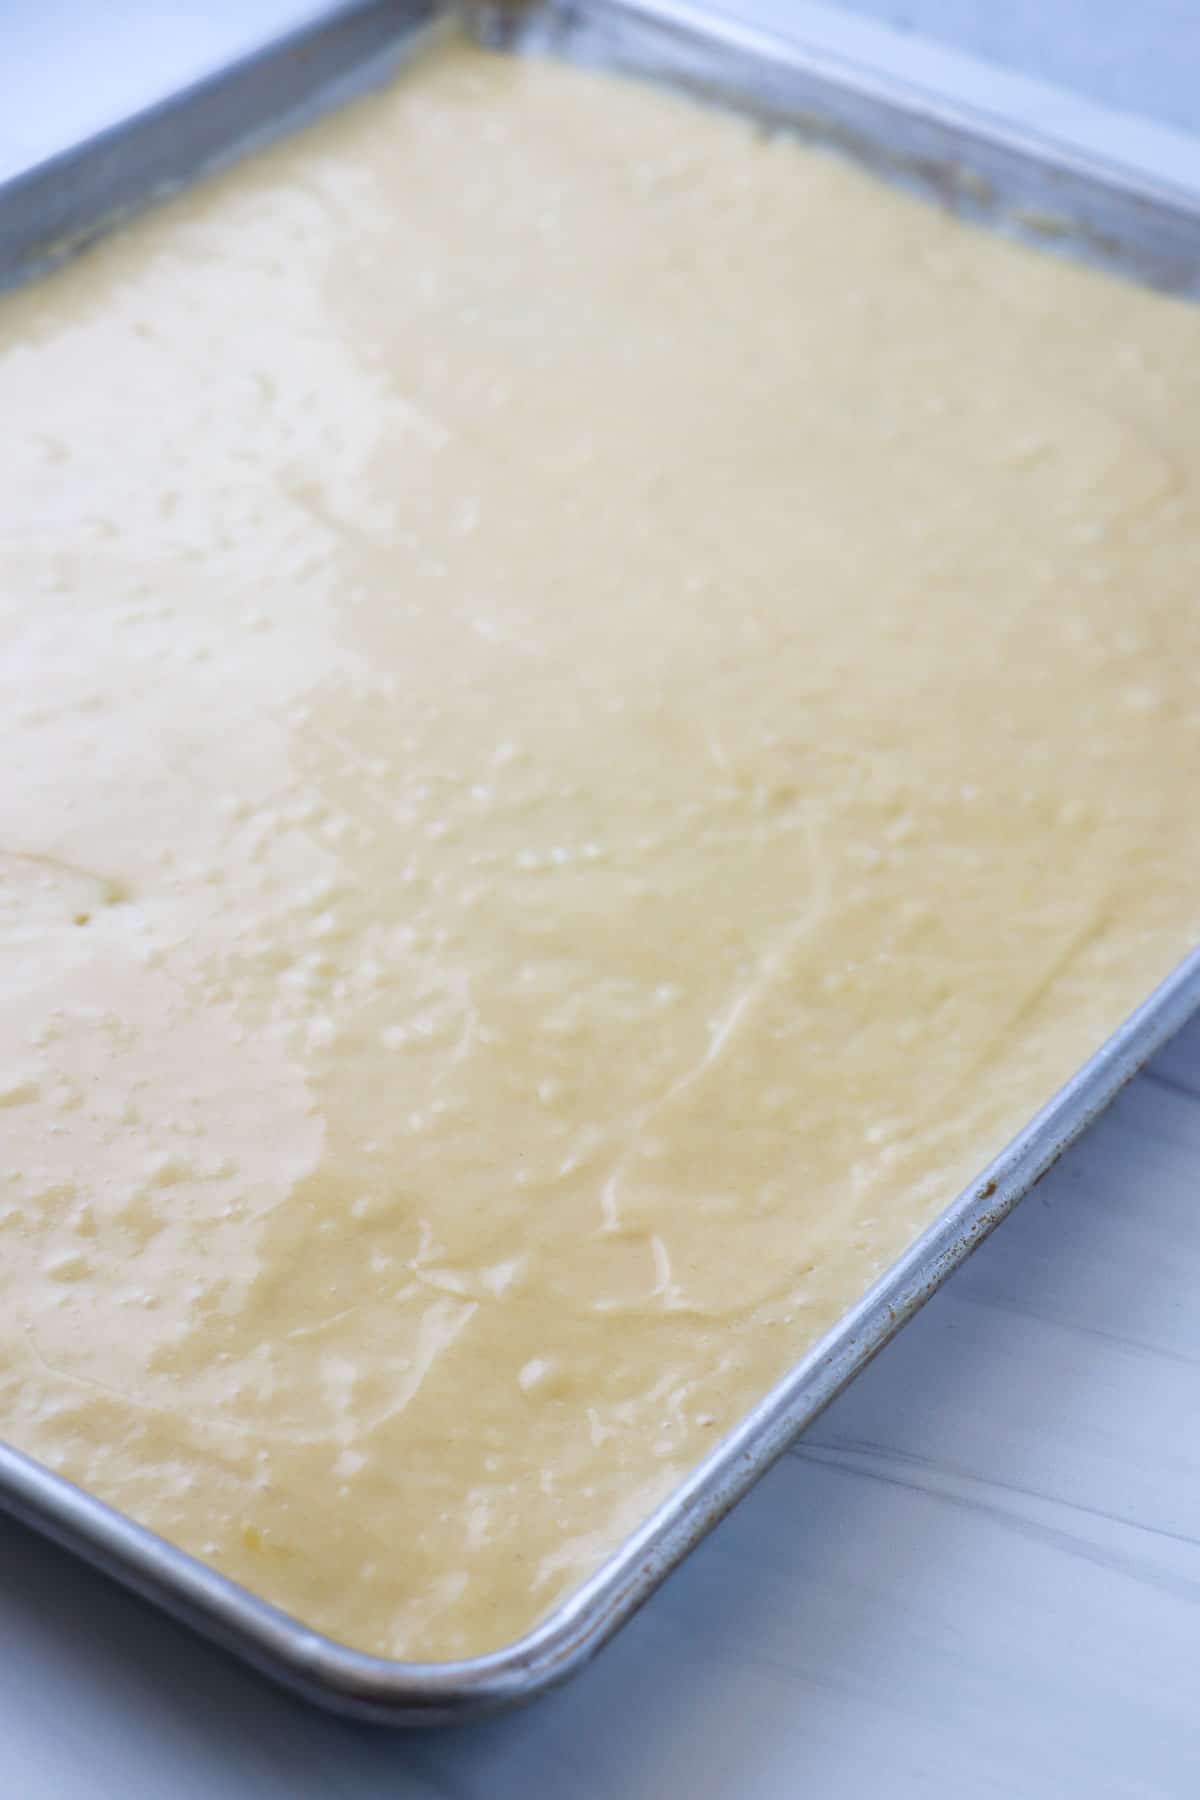 Vanilla cake batter spread out in a sheet pan.